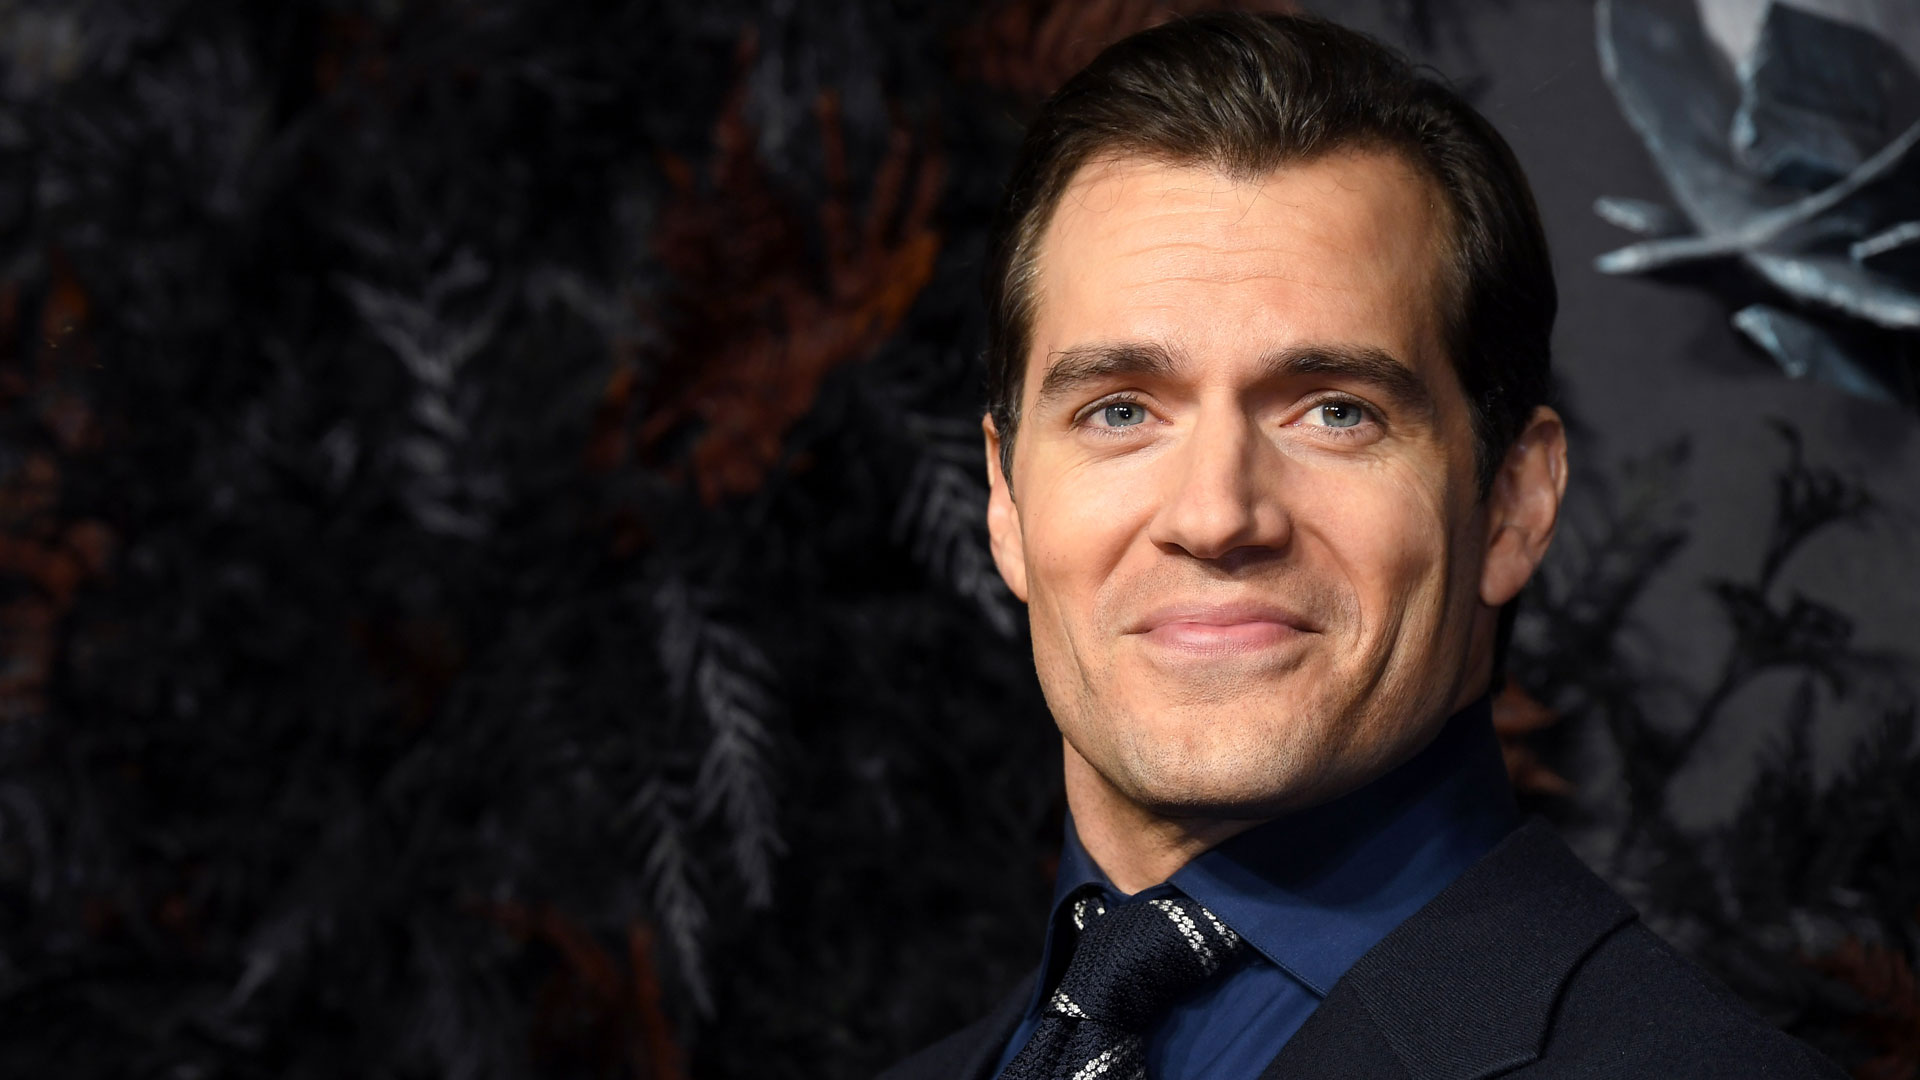 Henry Cavill Says He 'Would Love to' Be the Next James Bond